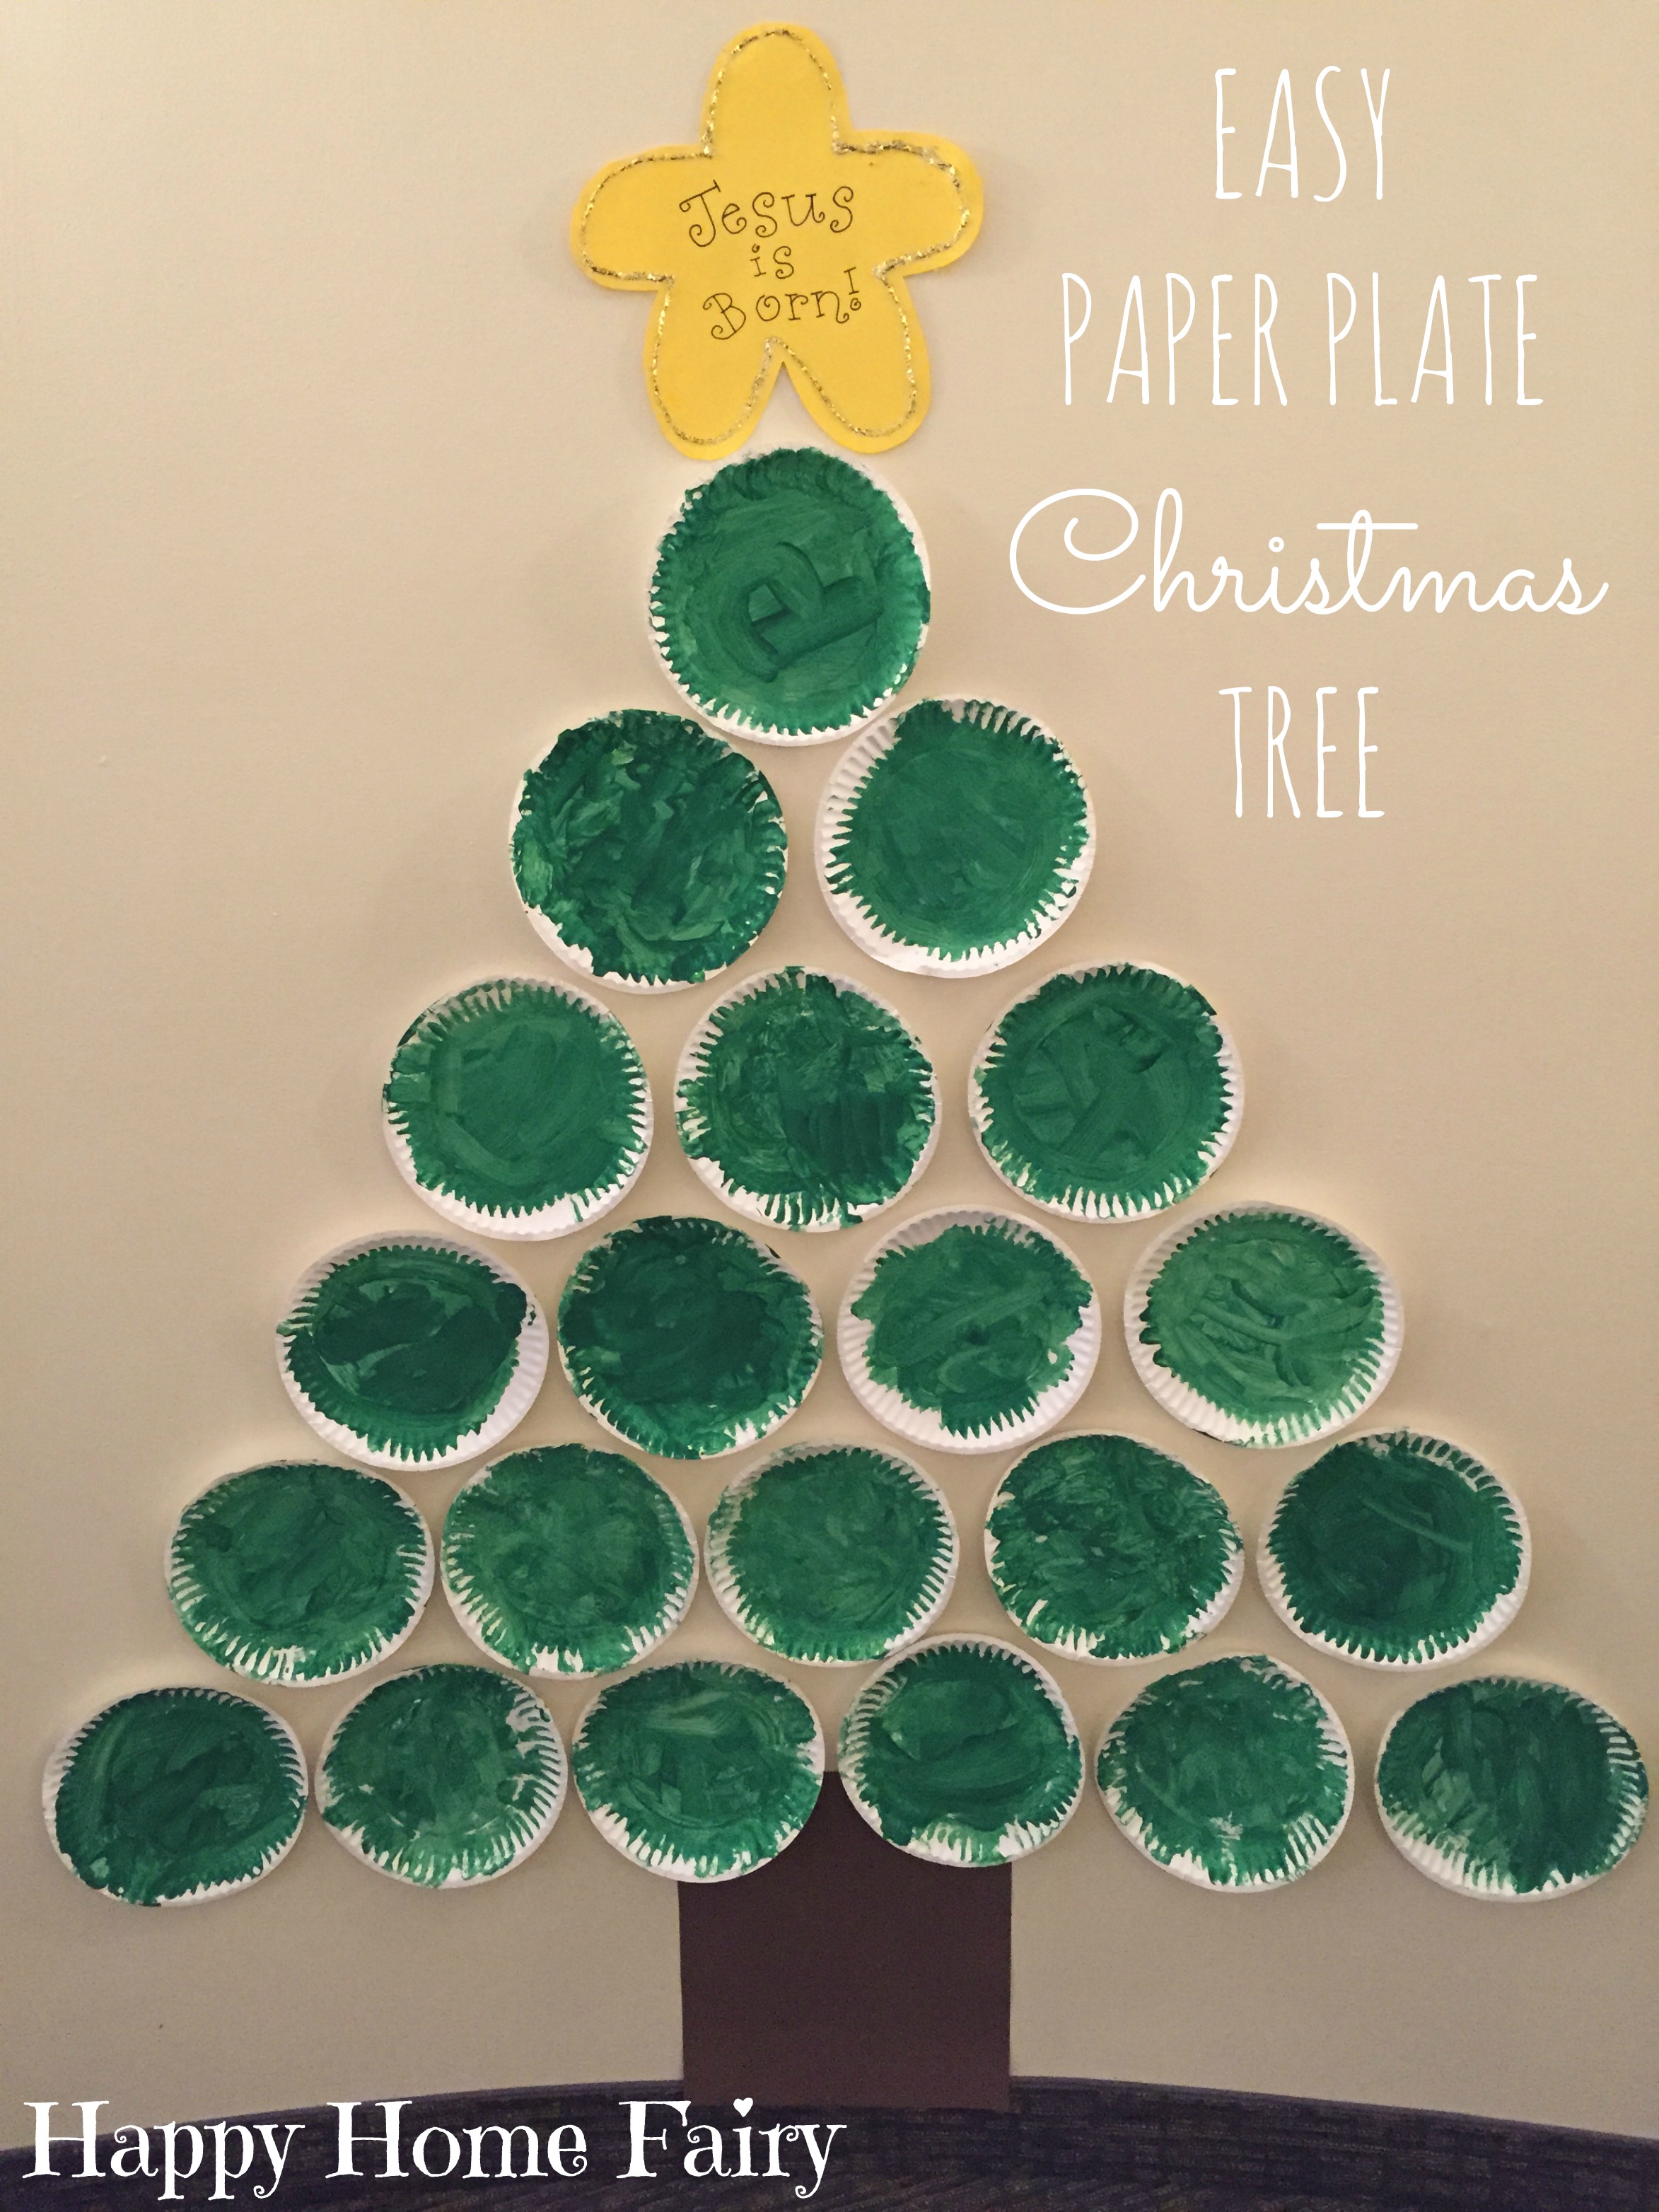 https://happyhomefairy.com/wp-content/uploads/2015/12/SUPER-EASY-AND-CUTE-PAPER-PLATE-CHRISTMAS-TREE-FOR-THE-HALLWAY.jpg